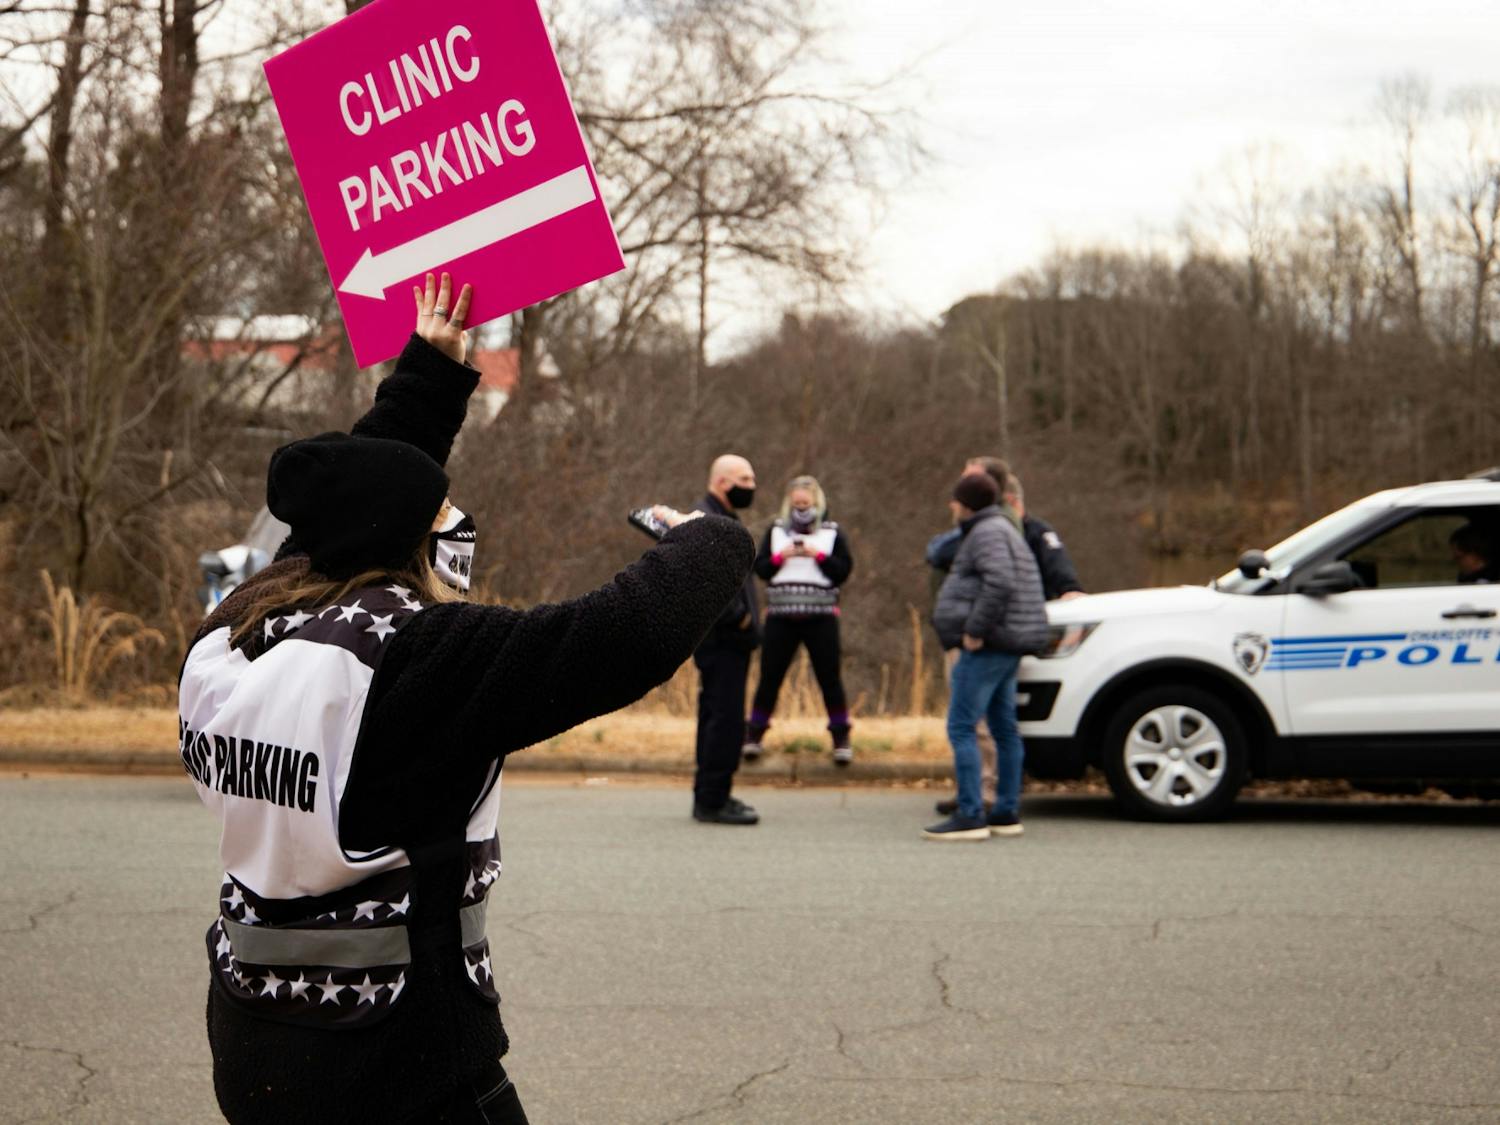 UNC student Reiley Baker directs vehicles towards the parking at A Preferred Women's Health Center of Charlotte while evangelical, anti-abortion activists argue with local police.